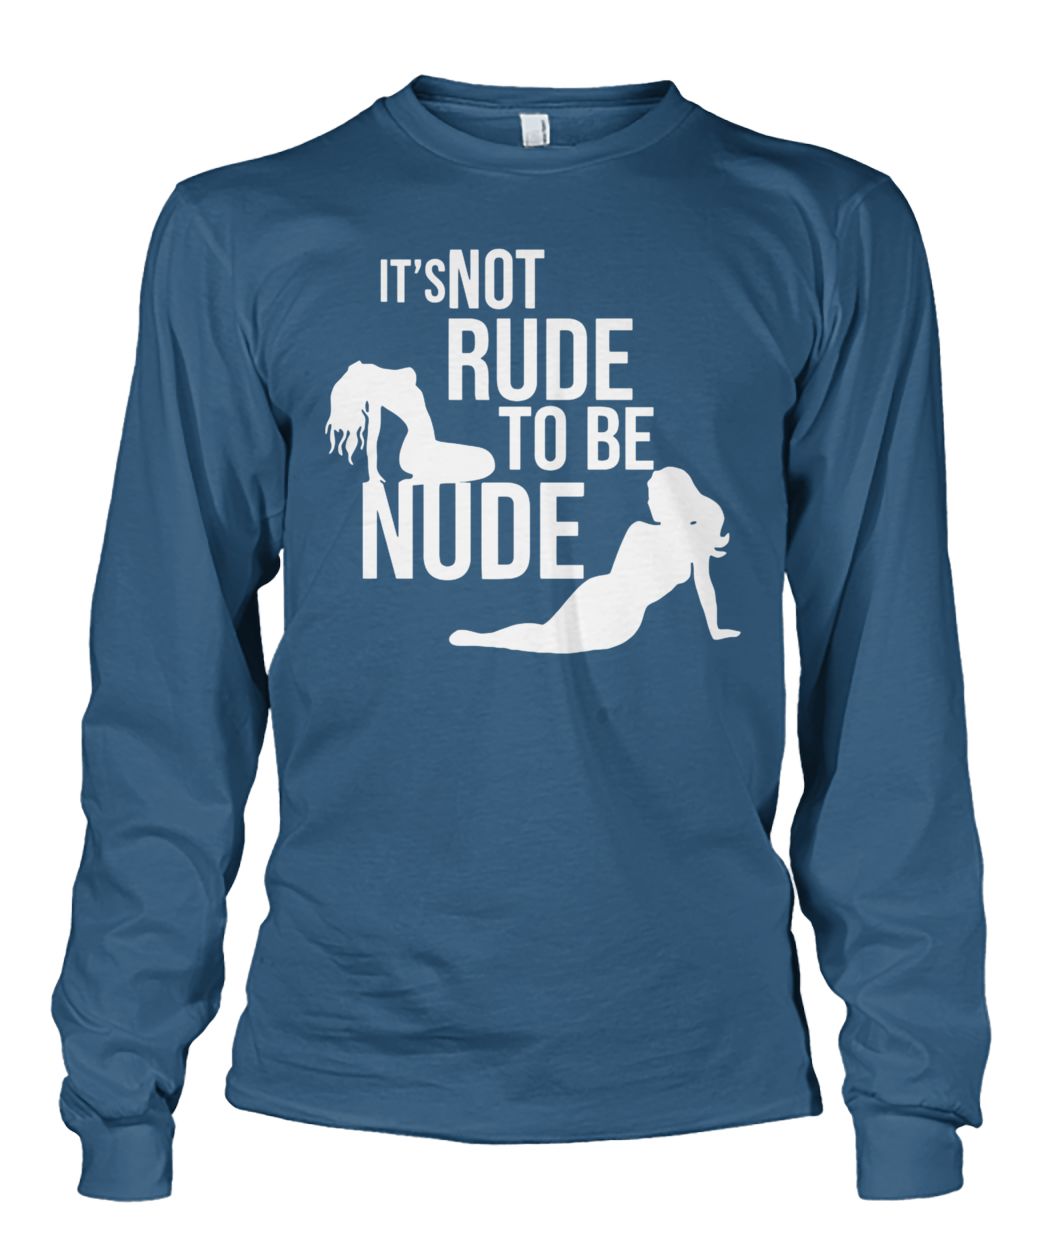 It's not rude to be nude unisex long sleeve